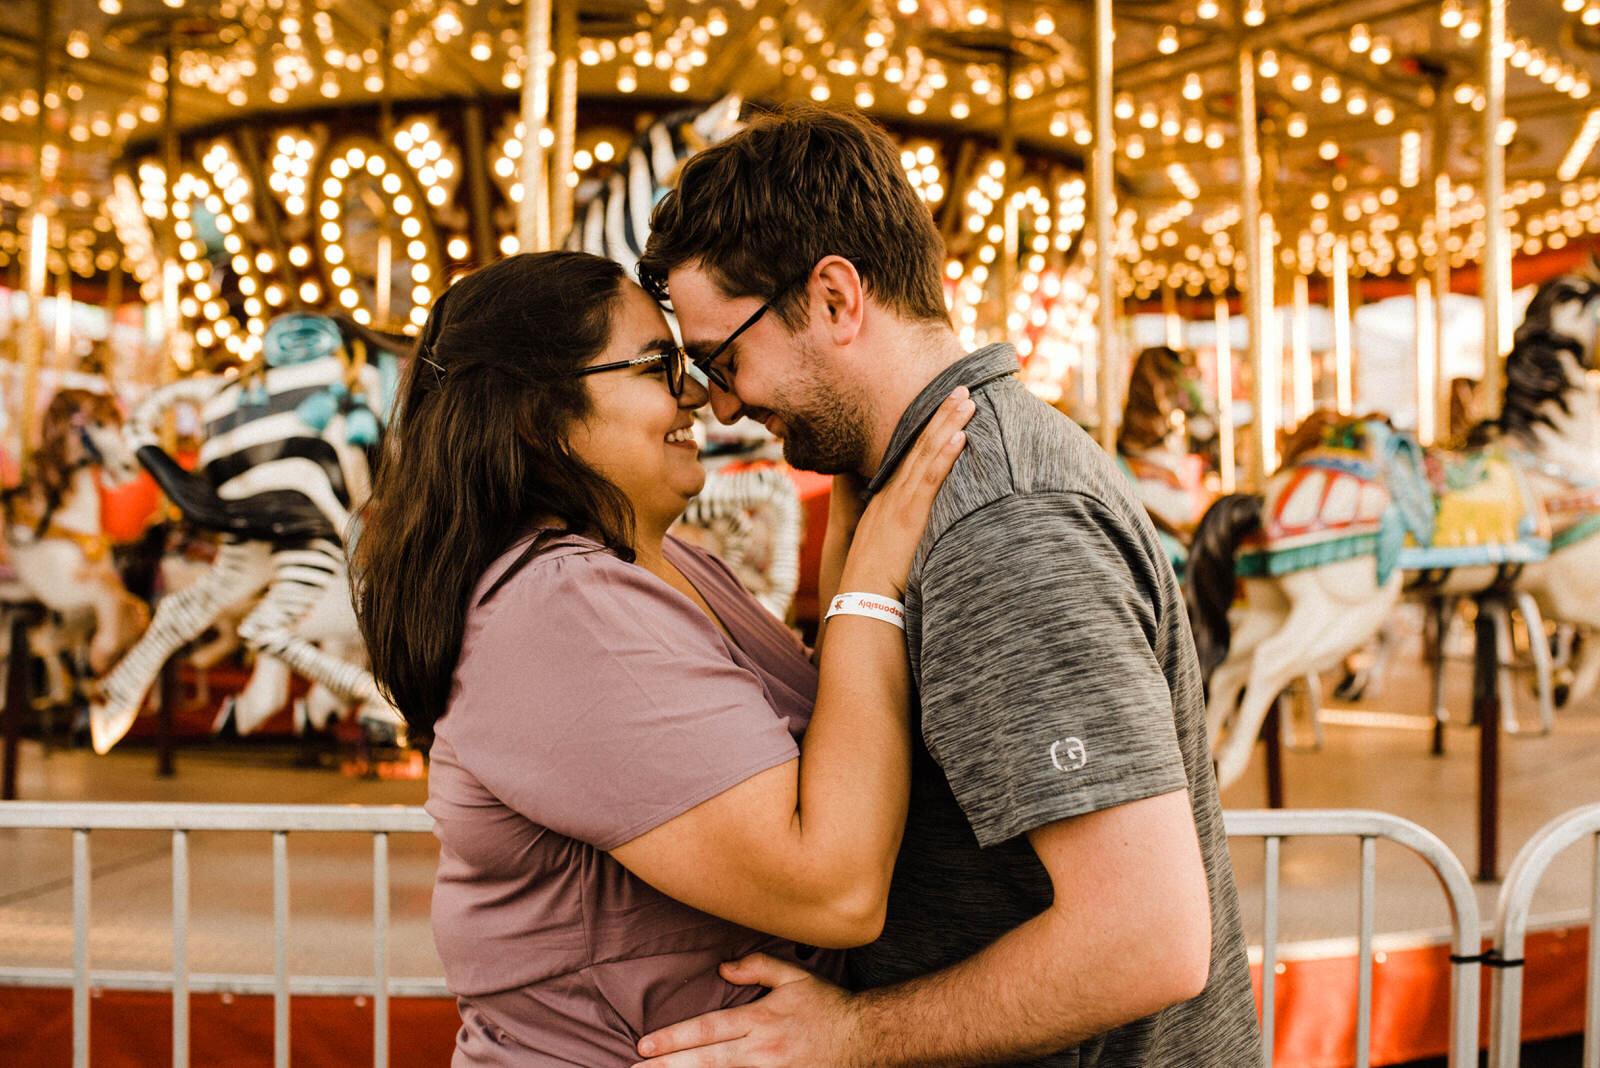 Romantic engagement photos by carousel at Orange County Fair in Costa Mesa